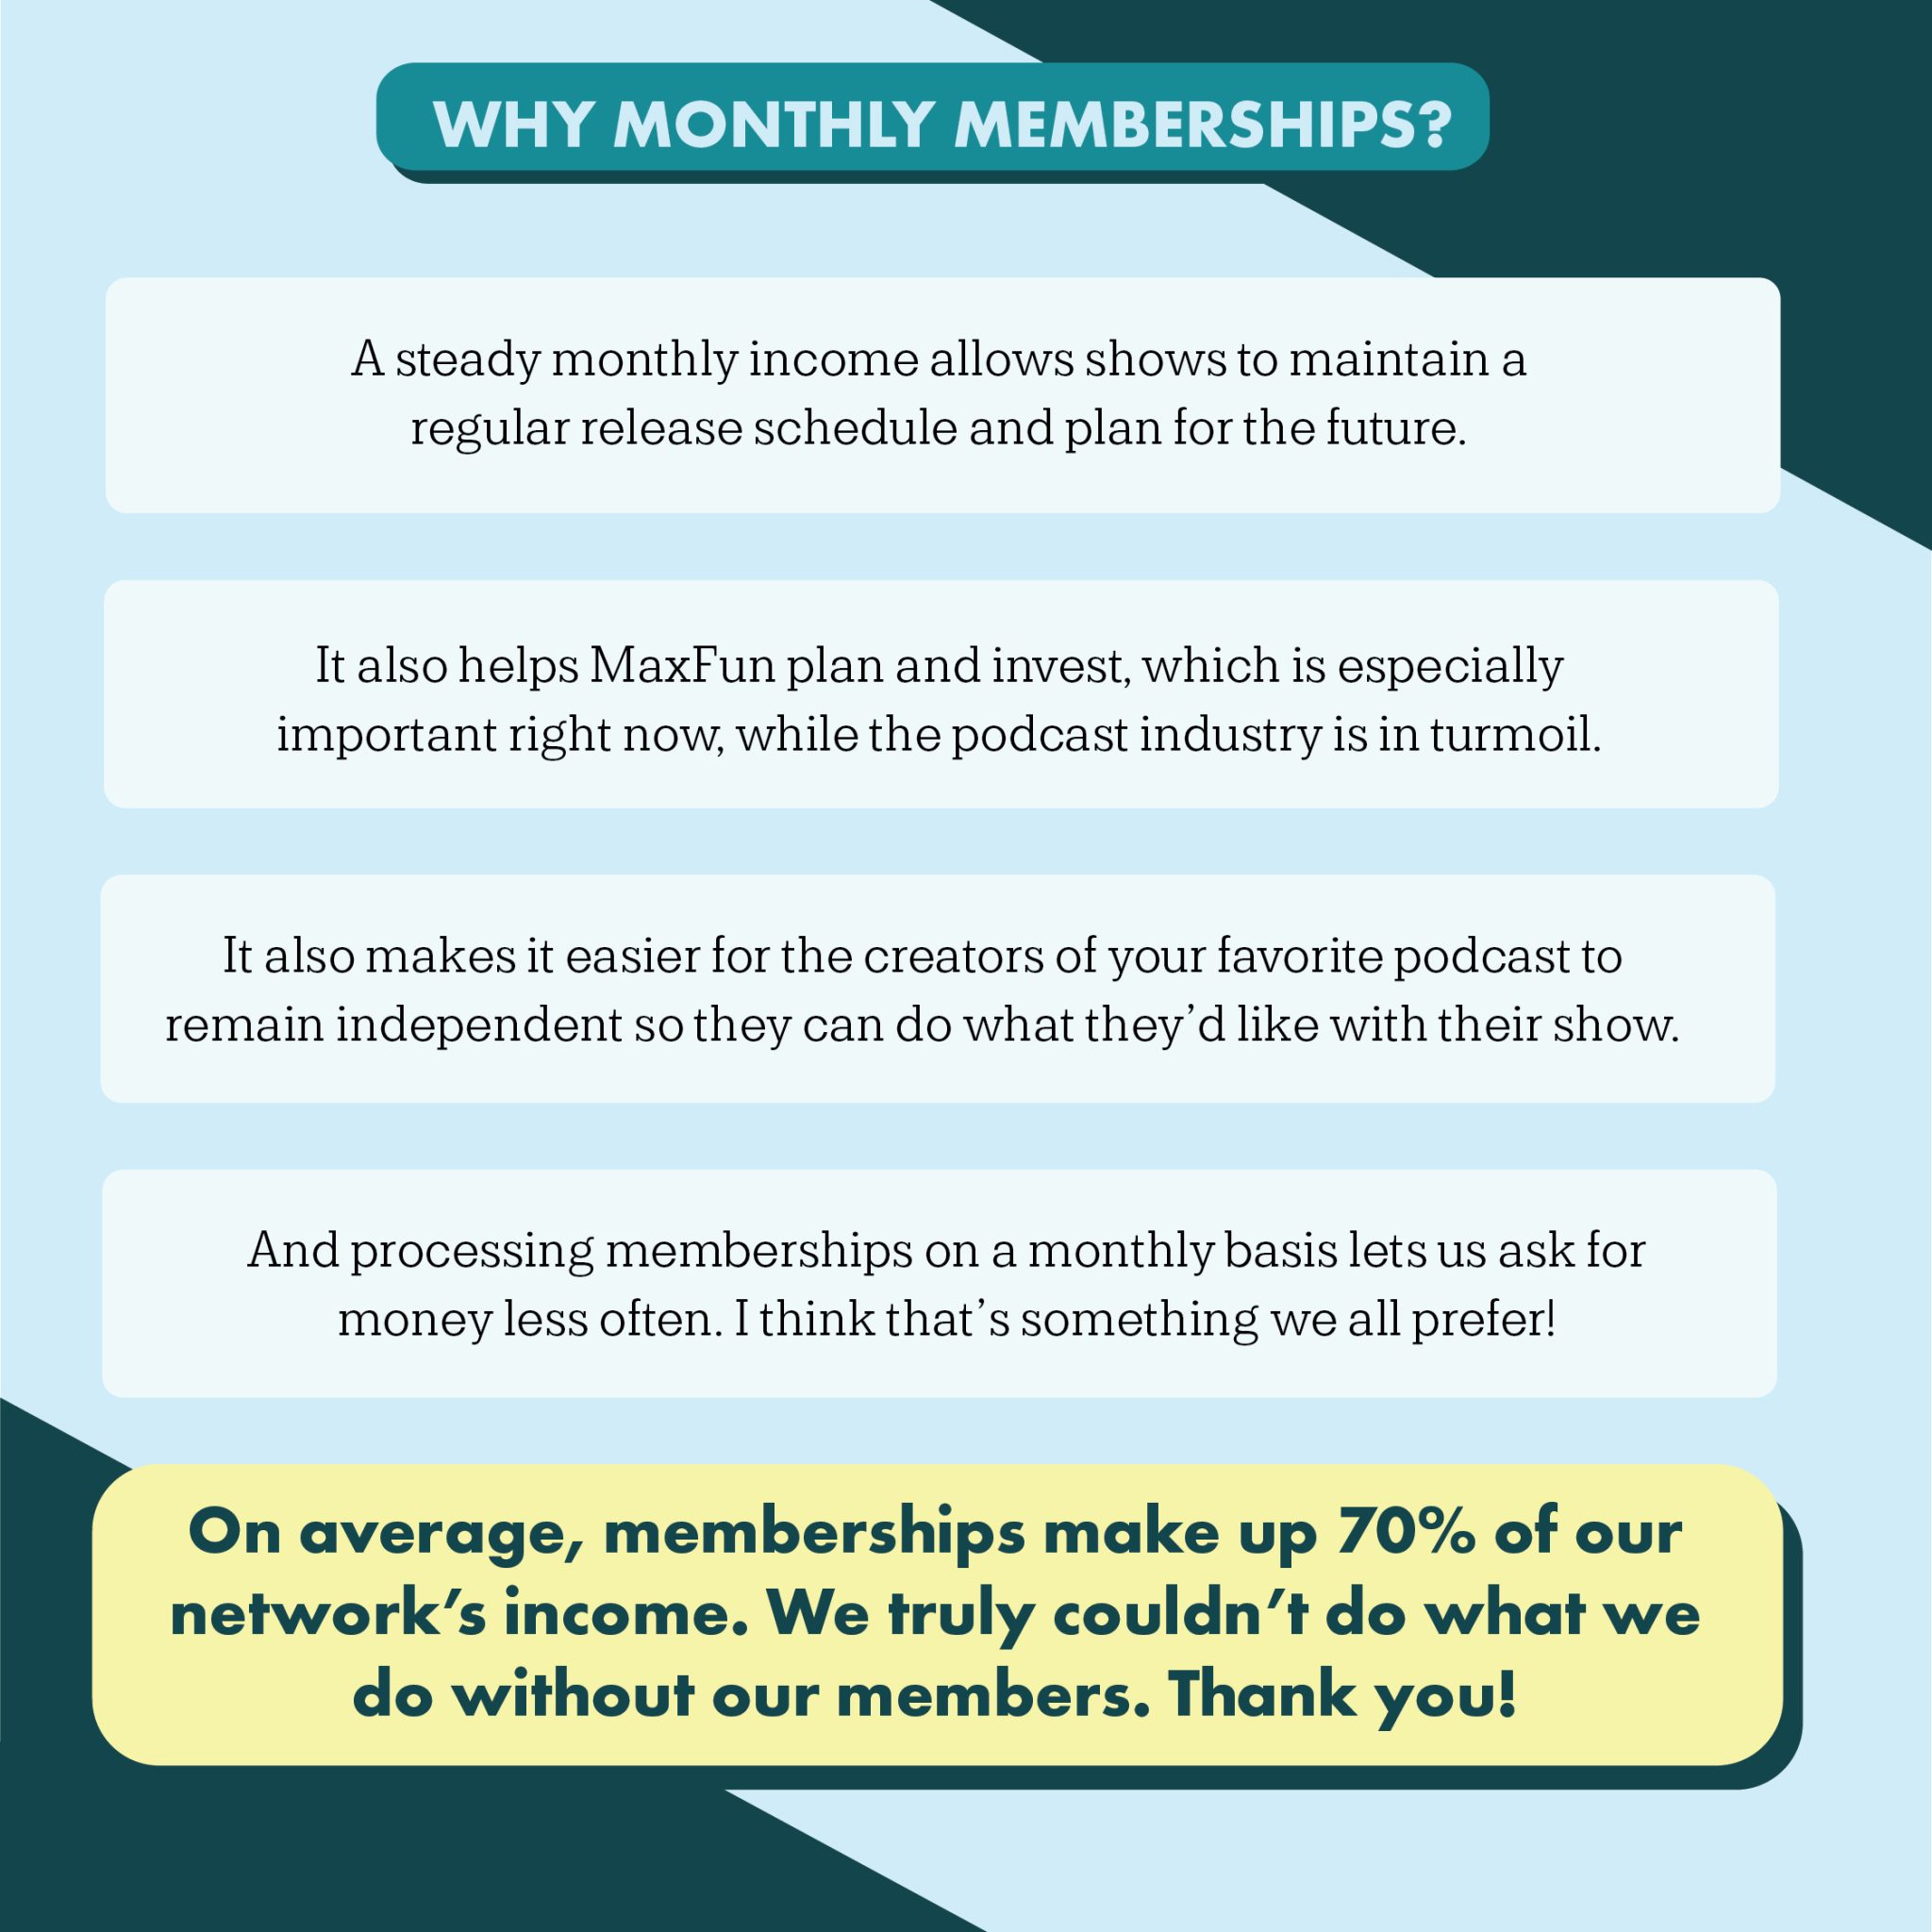 Heading: Why monthly memberships Text: A steady monthly income allows shows to maintain a regular release schedule and plan for the future It also helps MaxFun plan and invest, which is especially important right now, while the podcast industry is in turmoil. It also makes it easier for the creators of your favorite podcast to remain independent so they can do what they'd like with their show. And processing memberships on a monthly basis lets us ask for money less often. I think that's something we all prefer! Text in a bubble: On average, memberships make up 70% of our network's income. We truly couldn't do what we do without our members. Thank you!